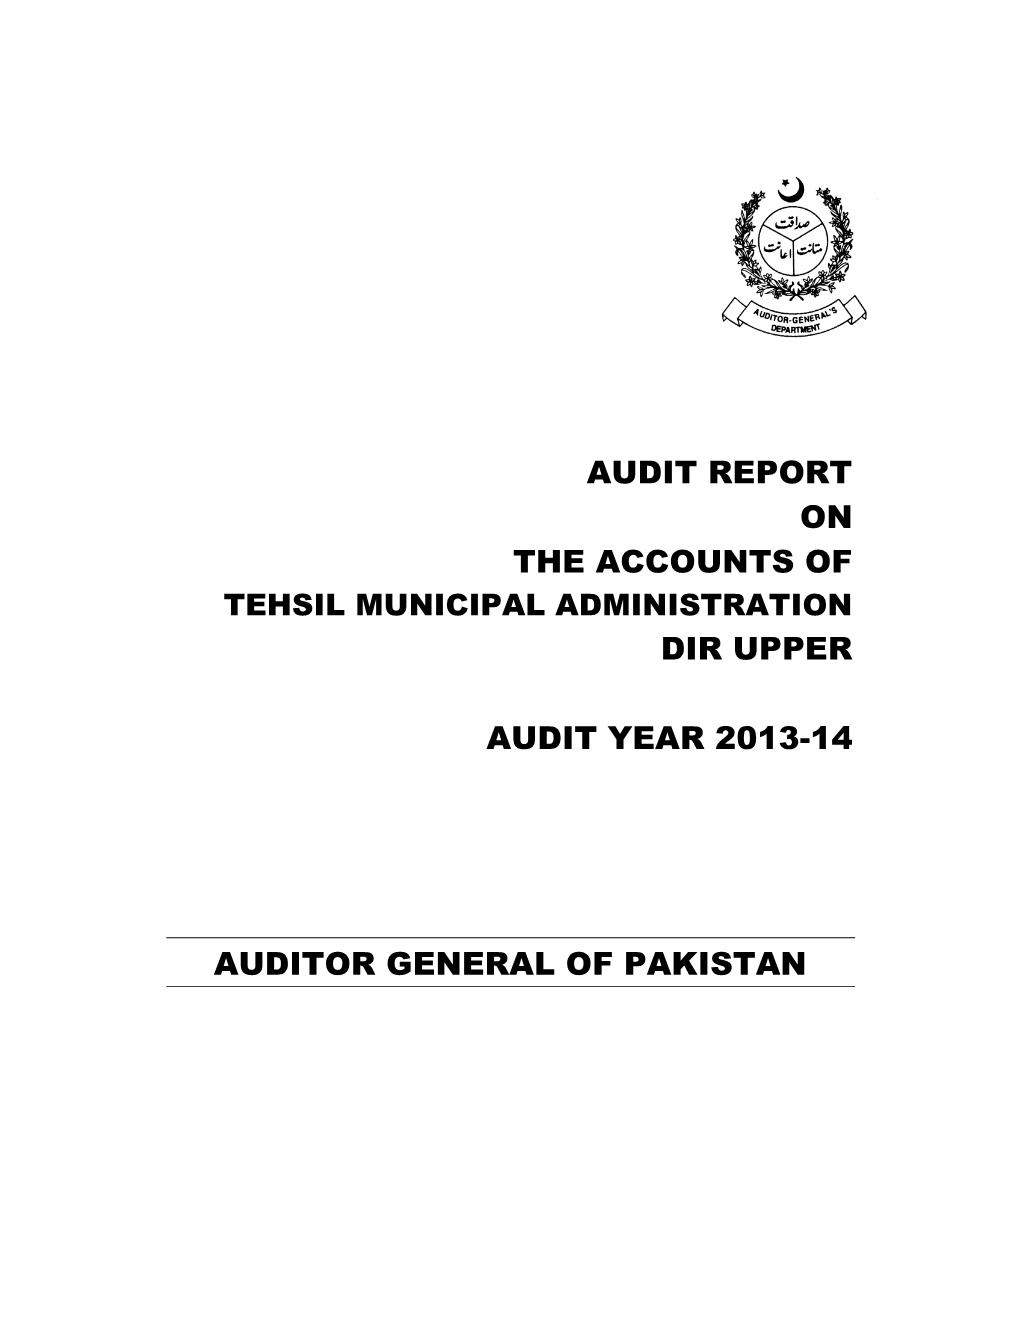 Audit Report on the Accounts of Dir Upper Audit Year 2013